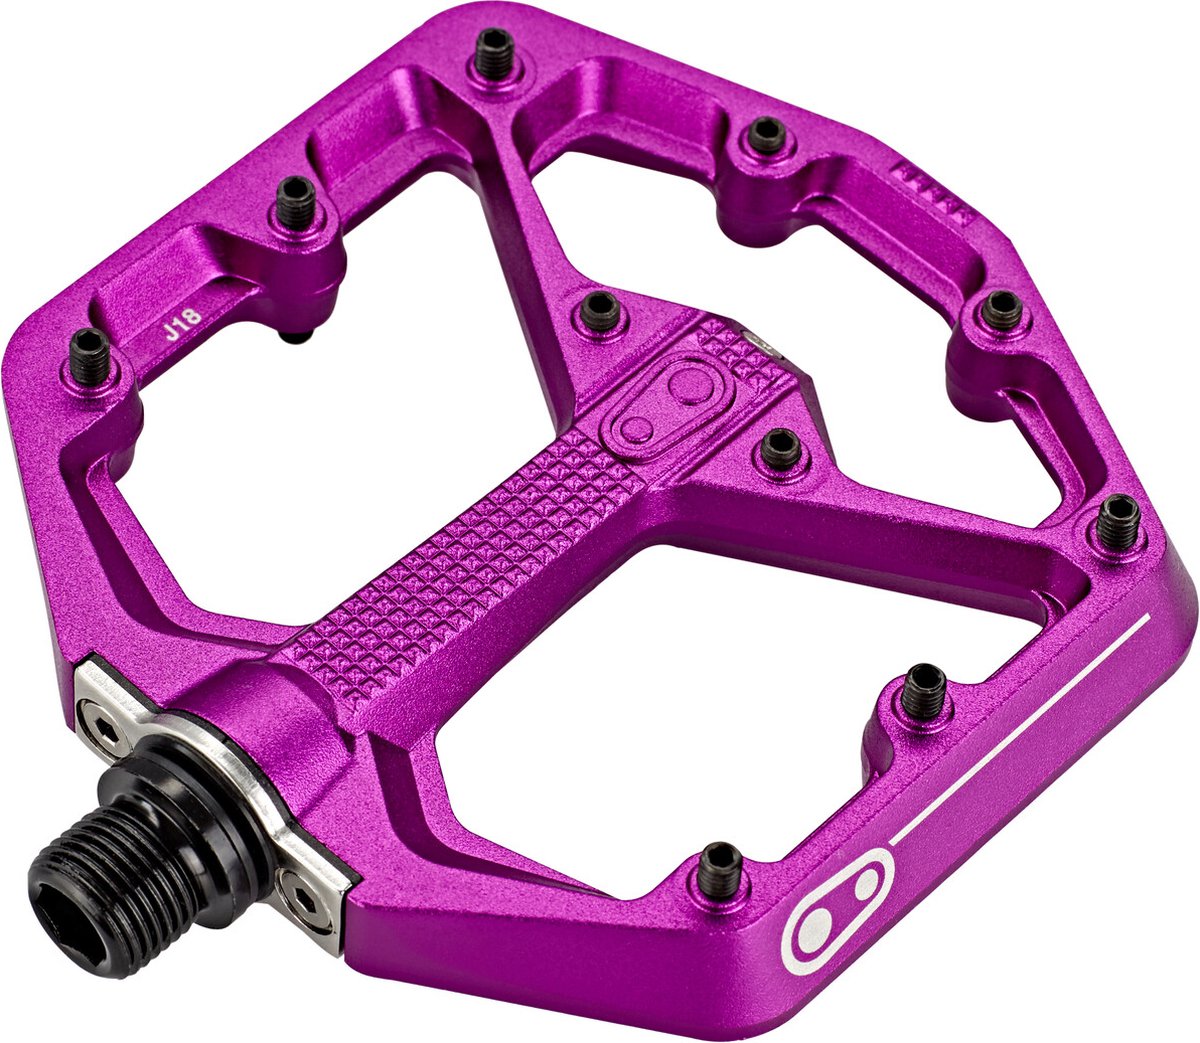 Crankbrothers Stamp 7 Small Pedalen, violet